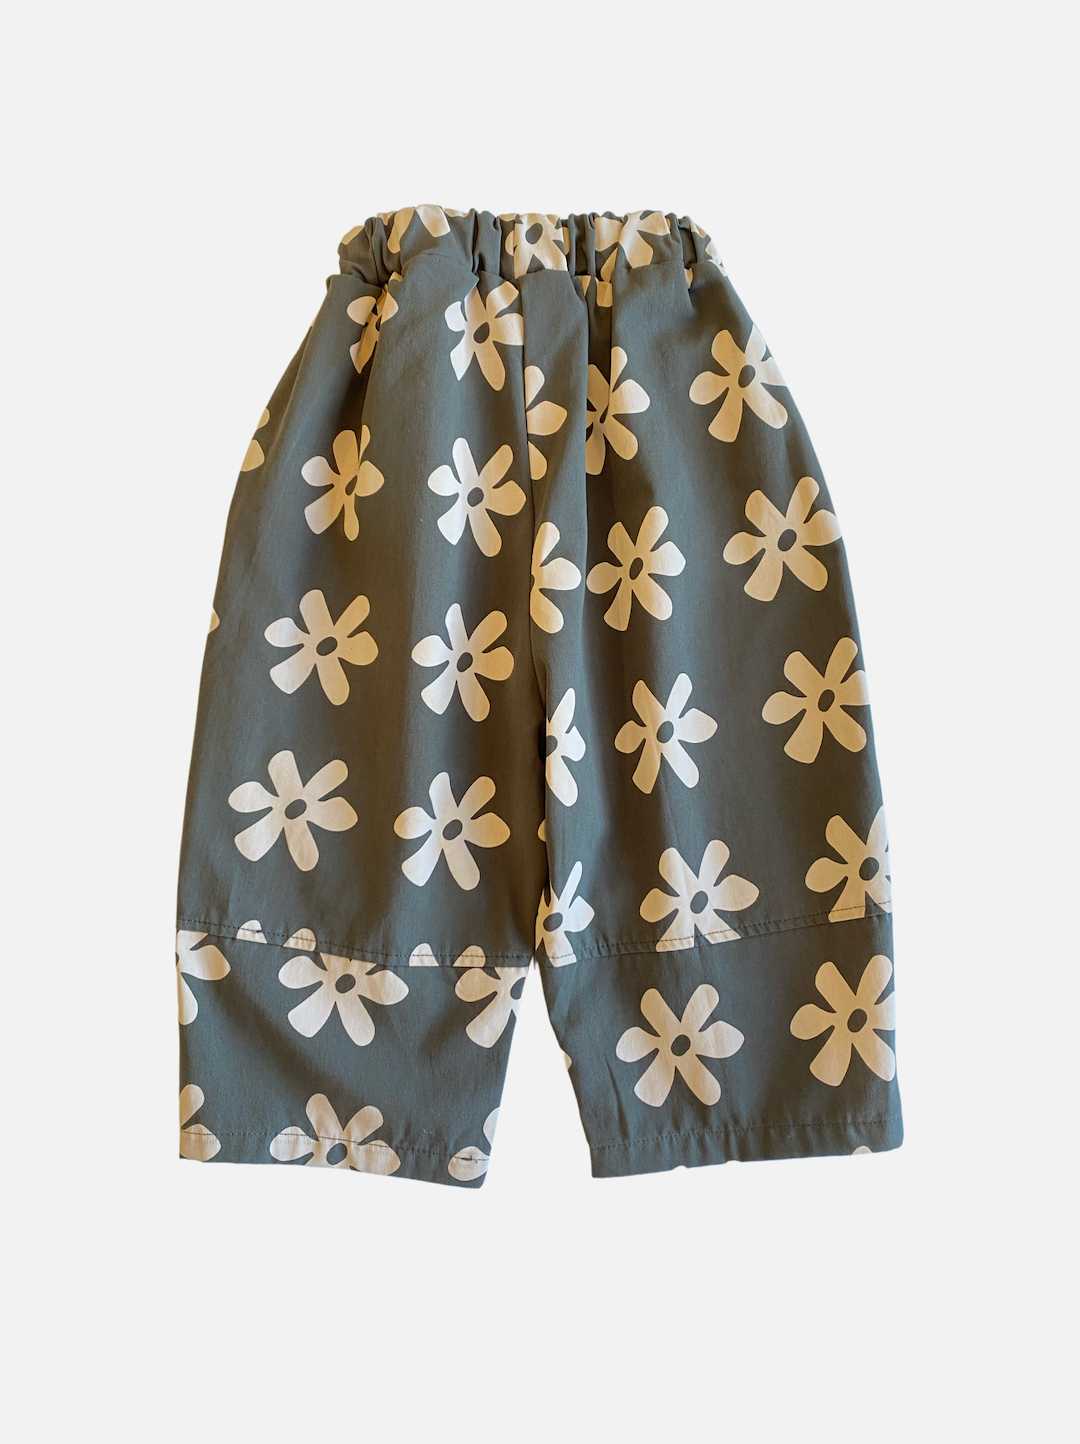 A pair of kids' pants in gray with cream flowers, back view